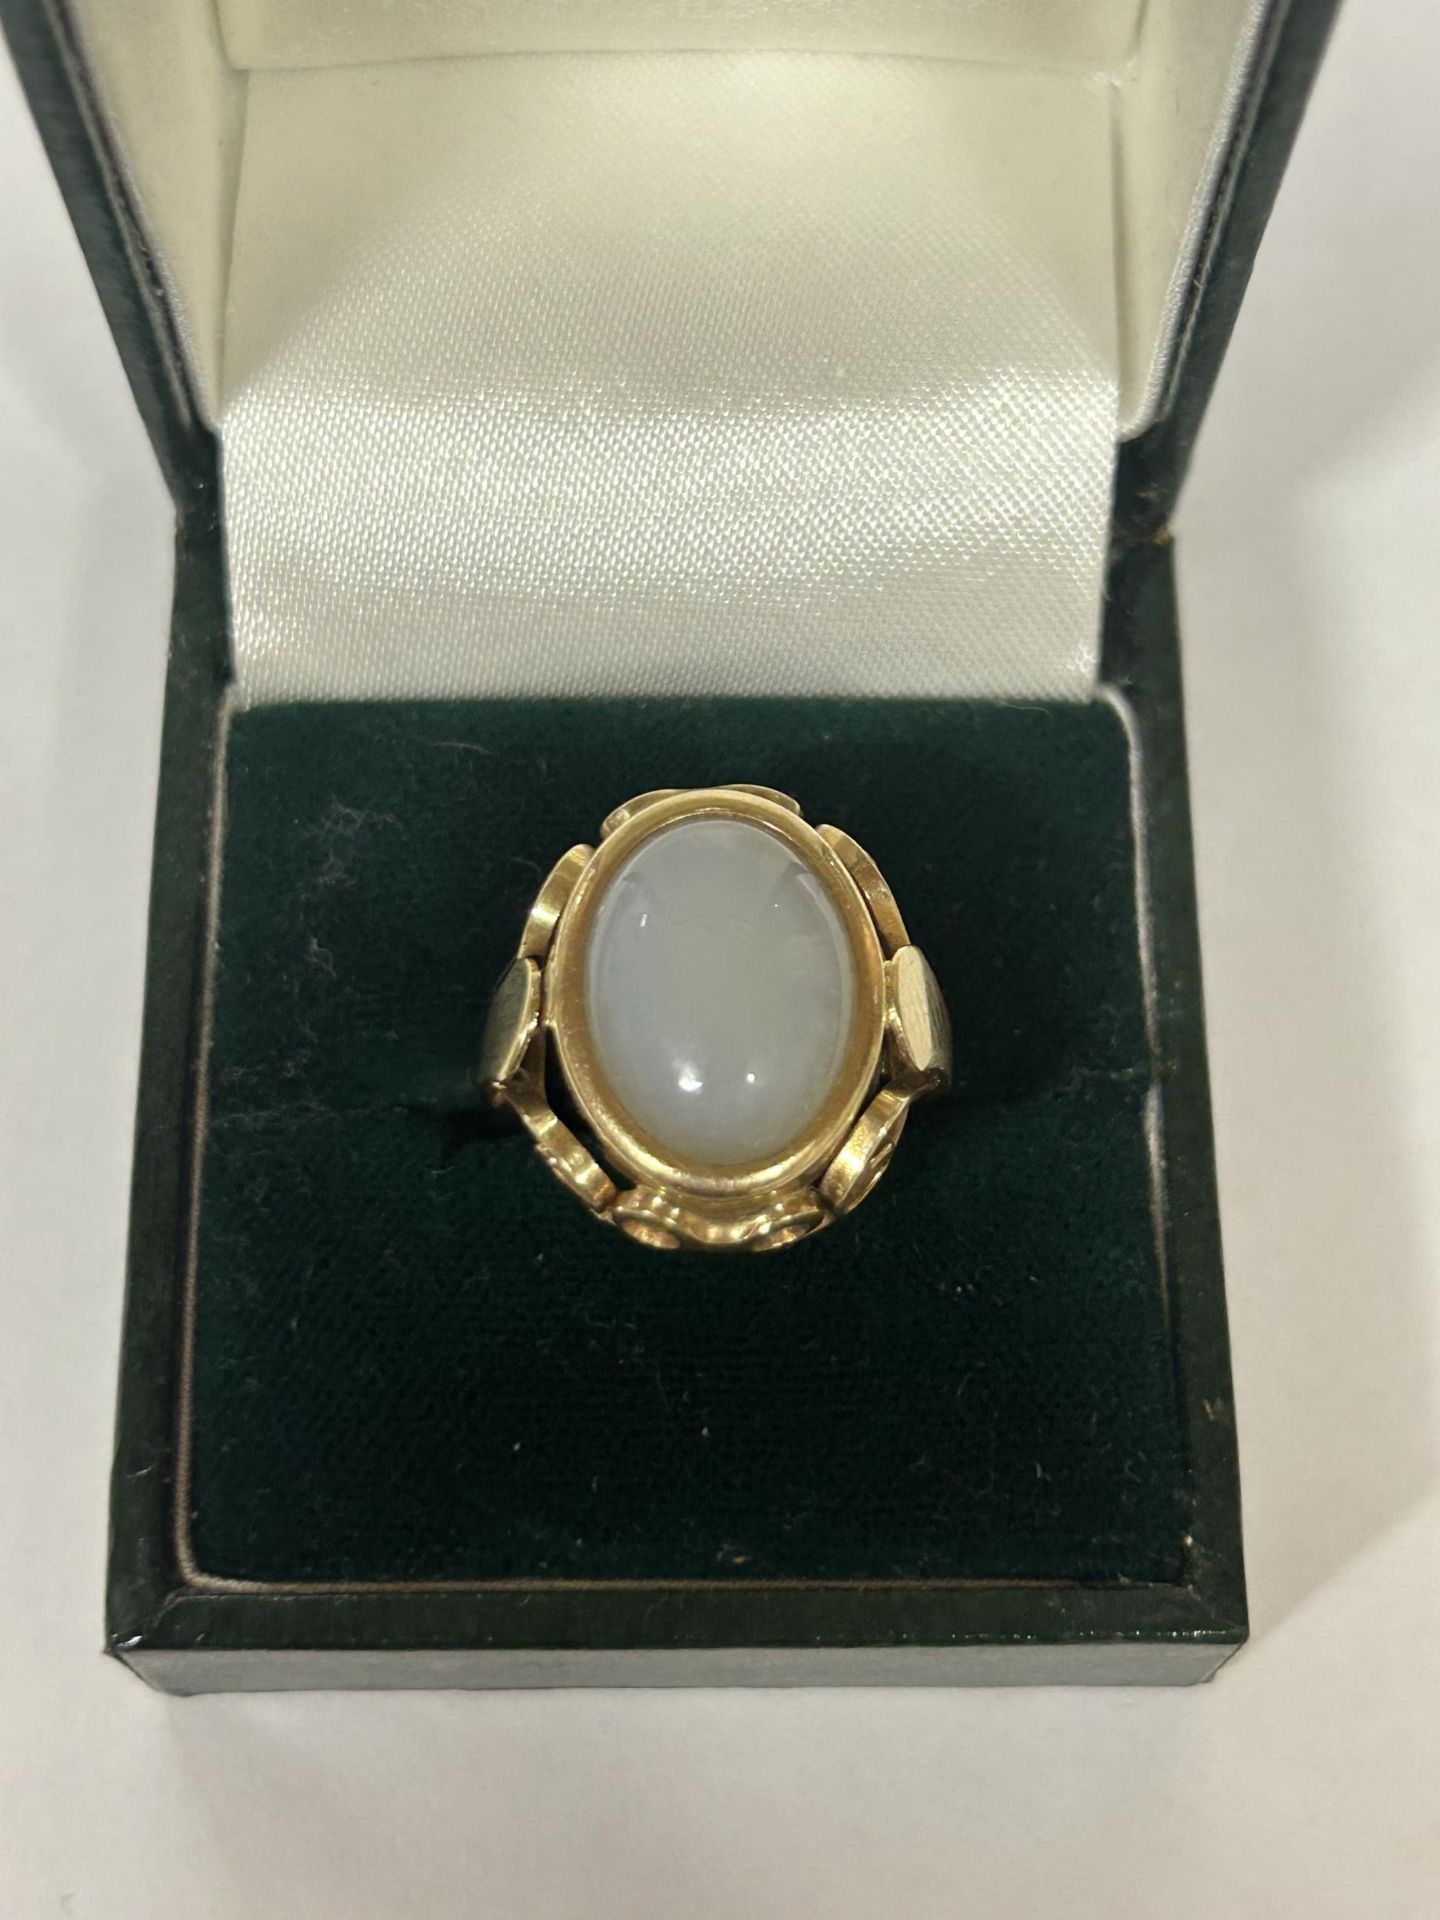 A 14CT YELLOW GOLD WHITE QUARTZ CABOCHON RING, SIZE L, WEIGHT 5.07 GRAMS - Image 4 of 5